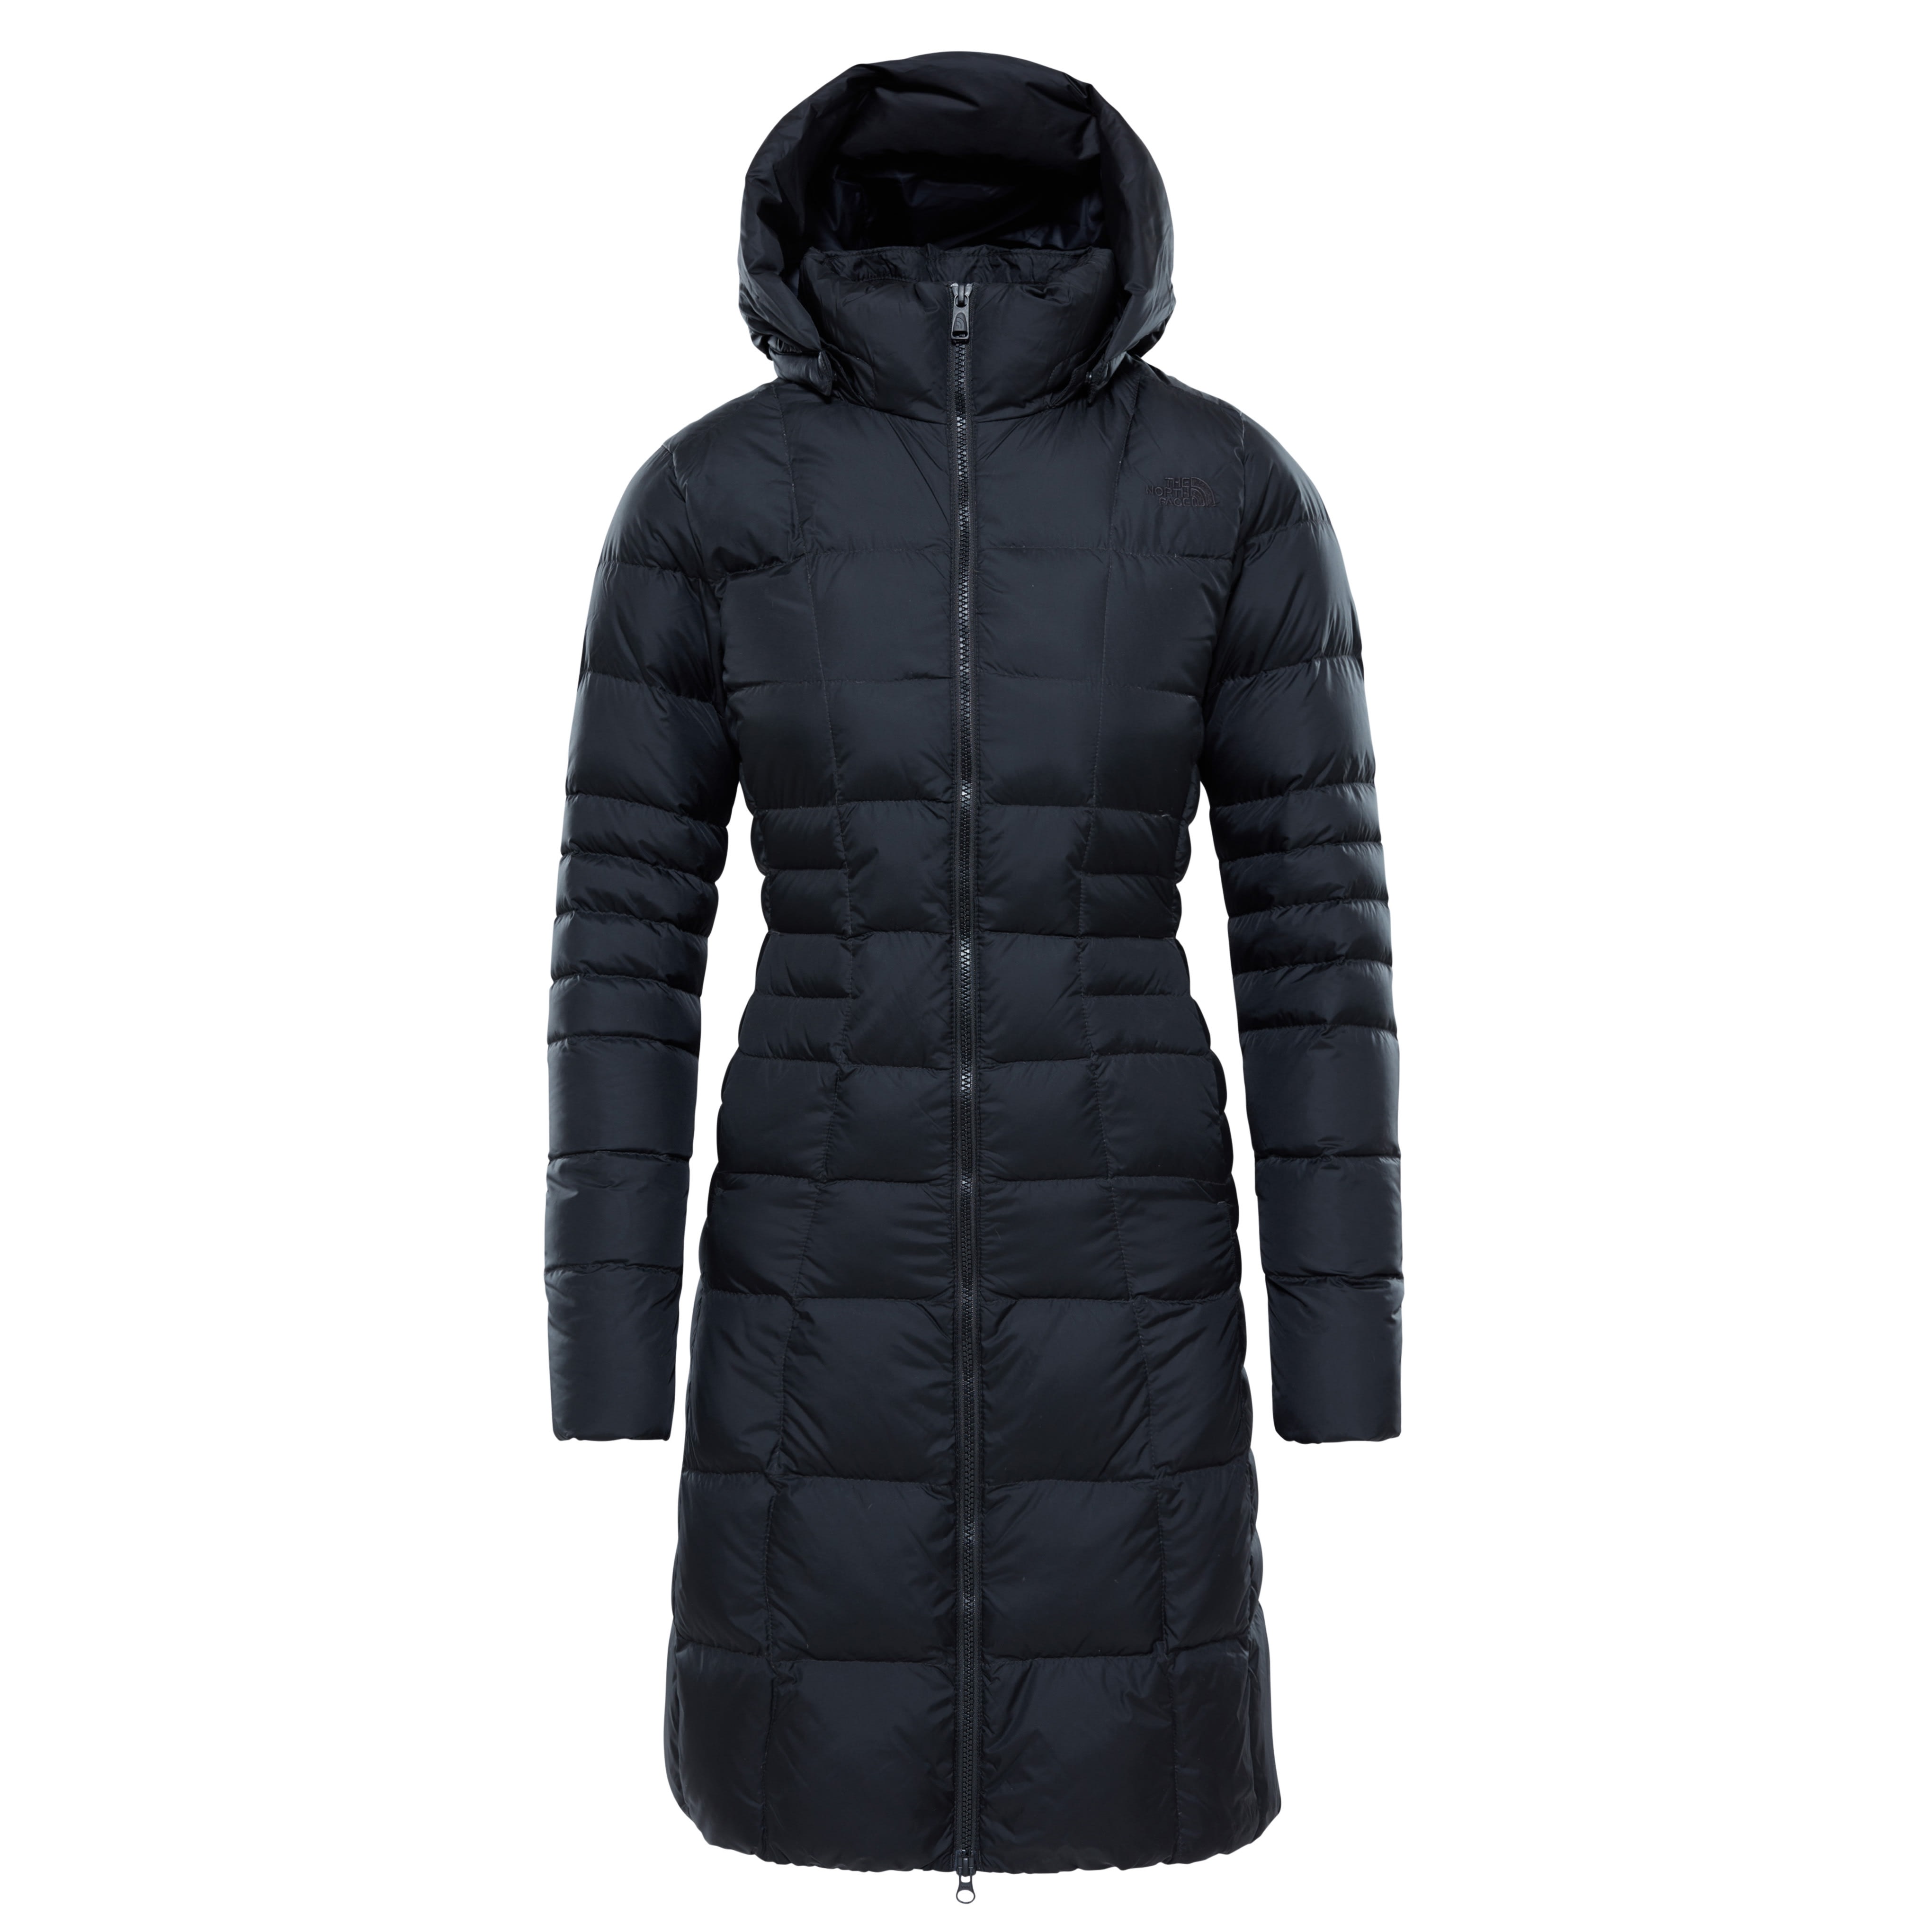 Metropolis Parka II from Outnorth